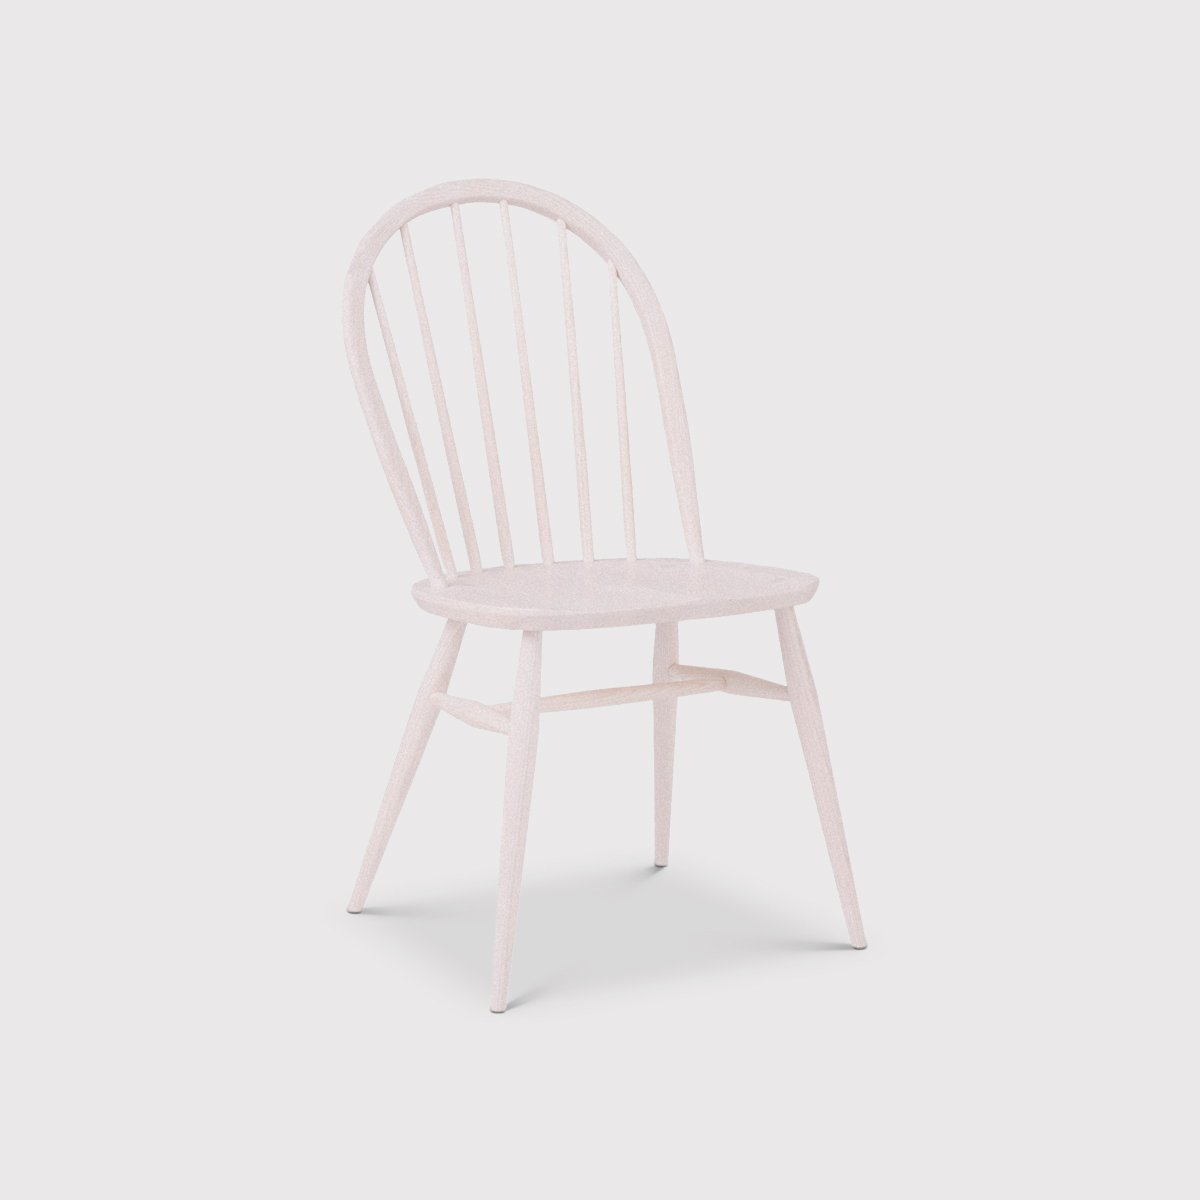 L.Ercolani Utility Dining Chair, White | Barker & Stonehouse